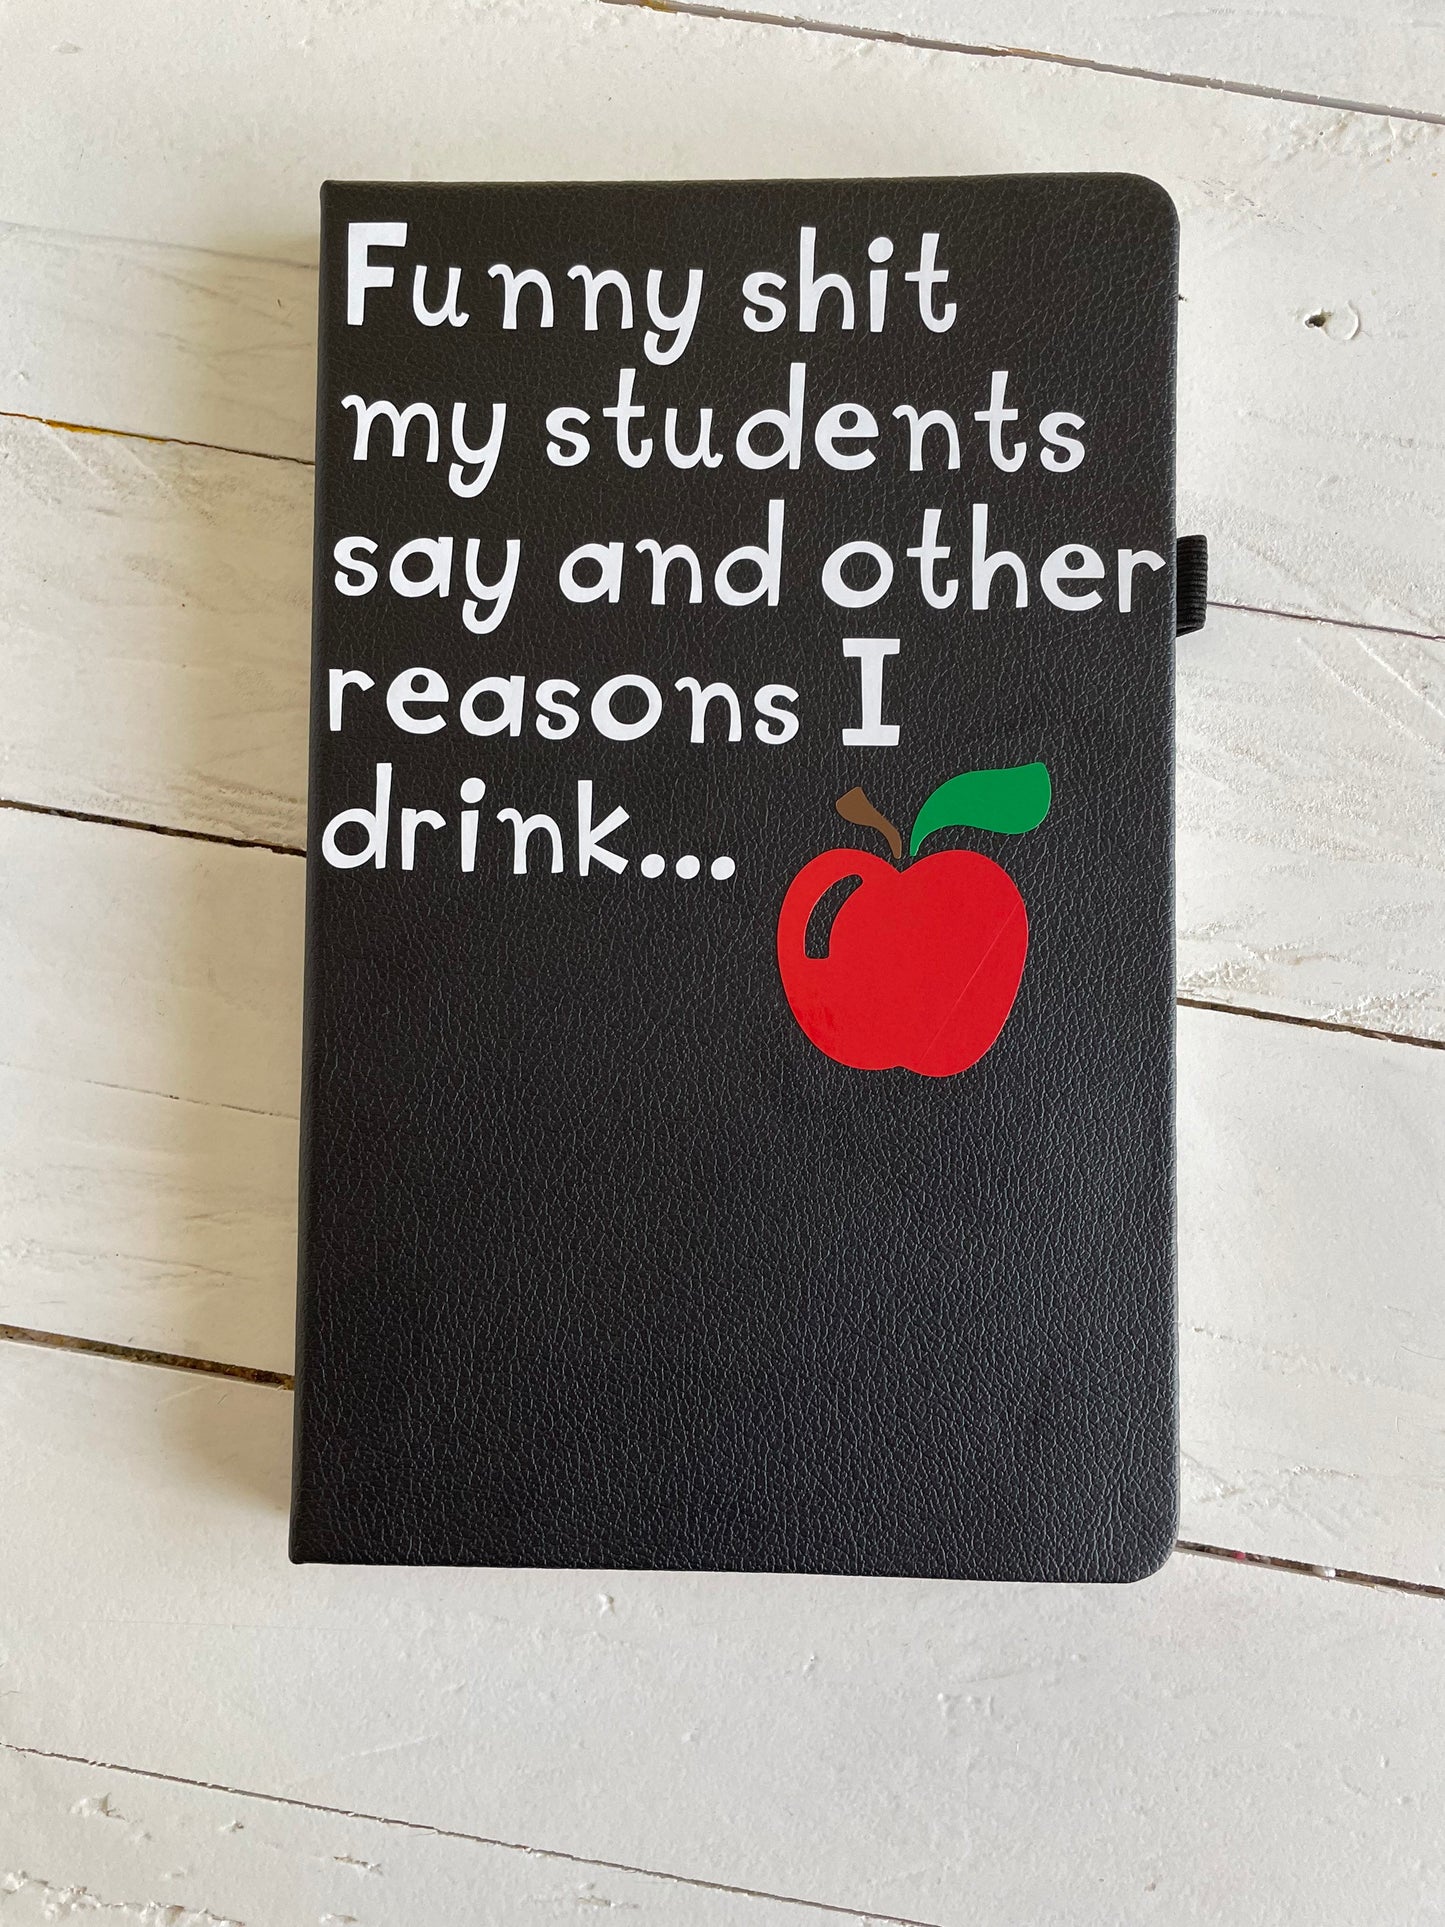 Funny shit my students say and other reasons I drink, Black Lined Journal